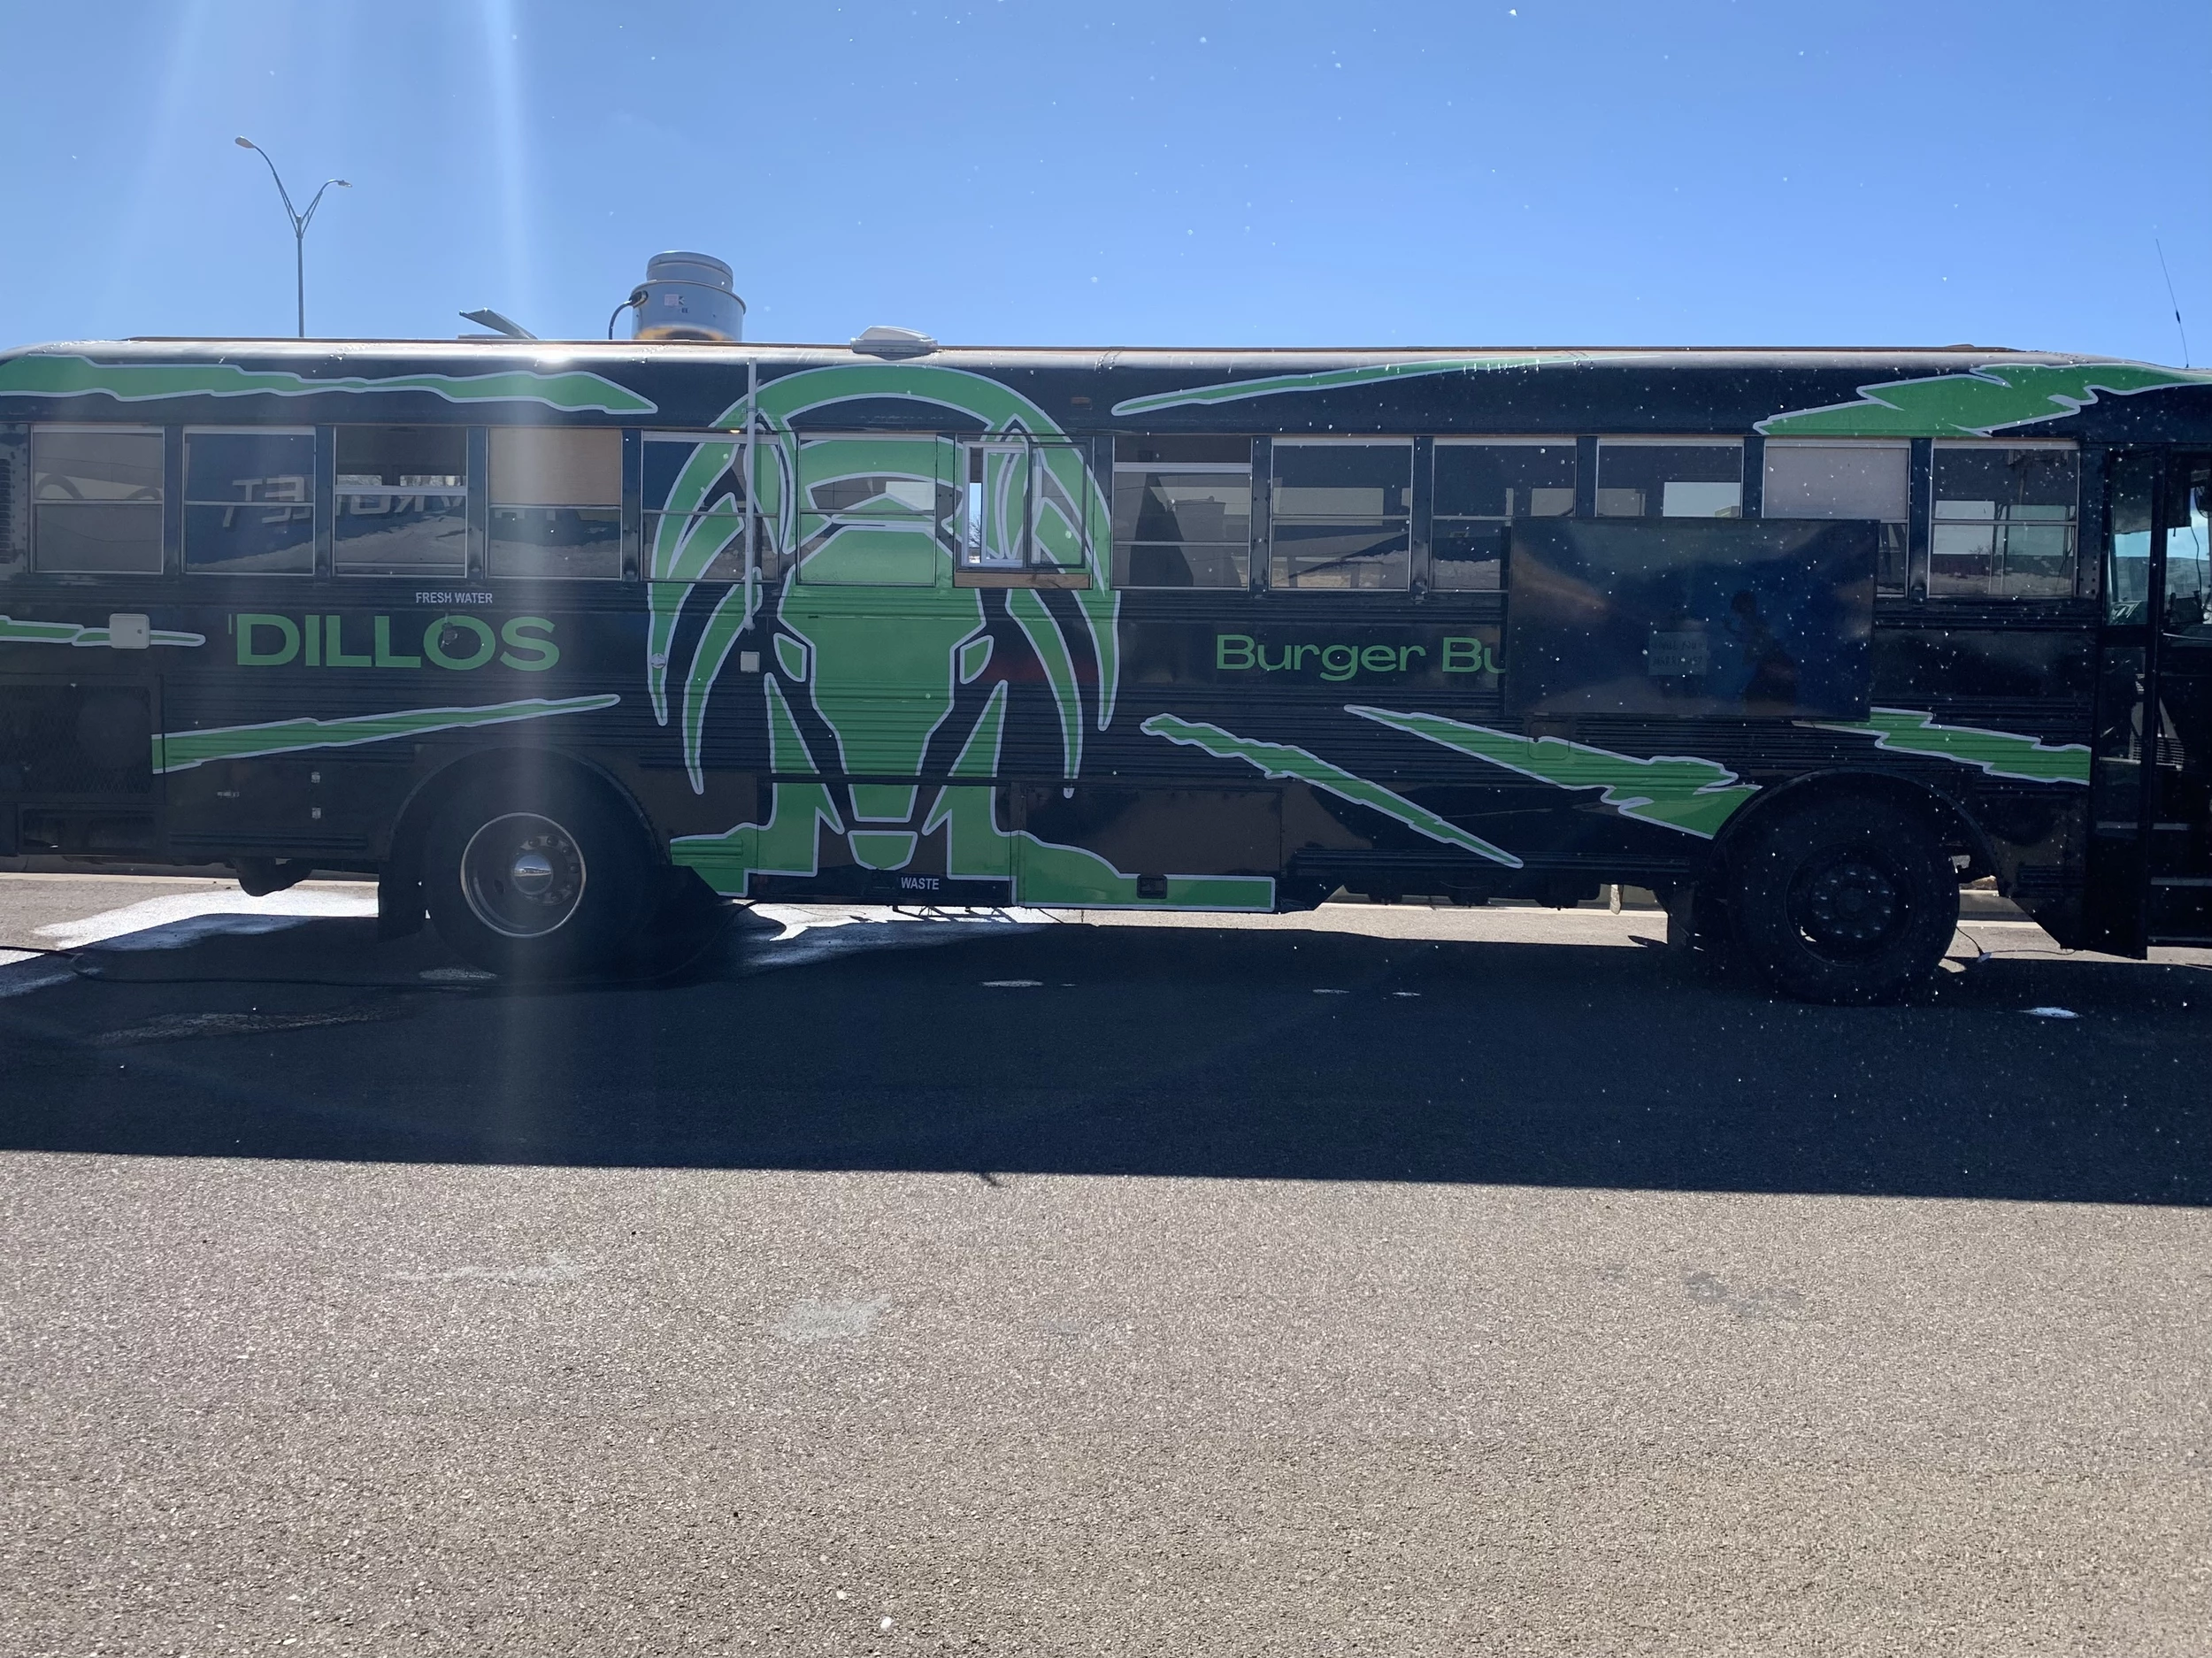 Amarillo Texas Stars - REVIEW] Dillo's Burger Bus Upping the Amarillo Food Truck Game